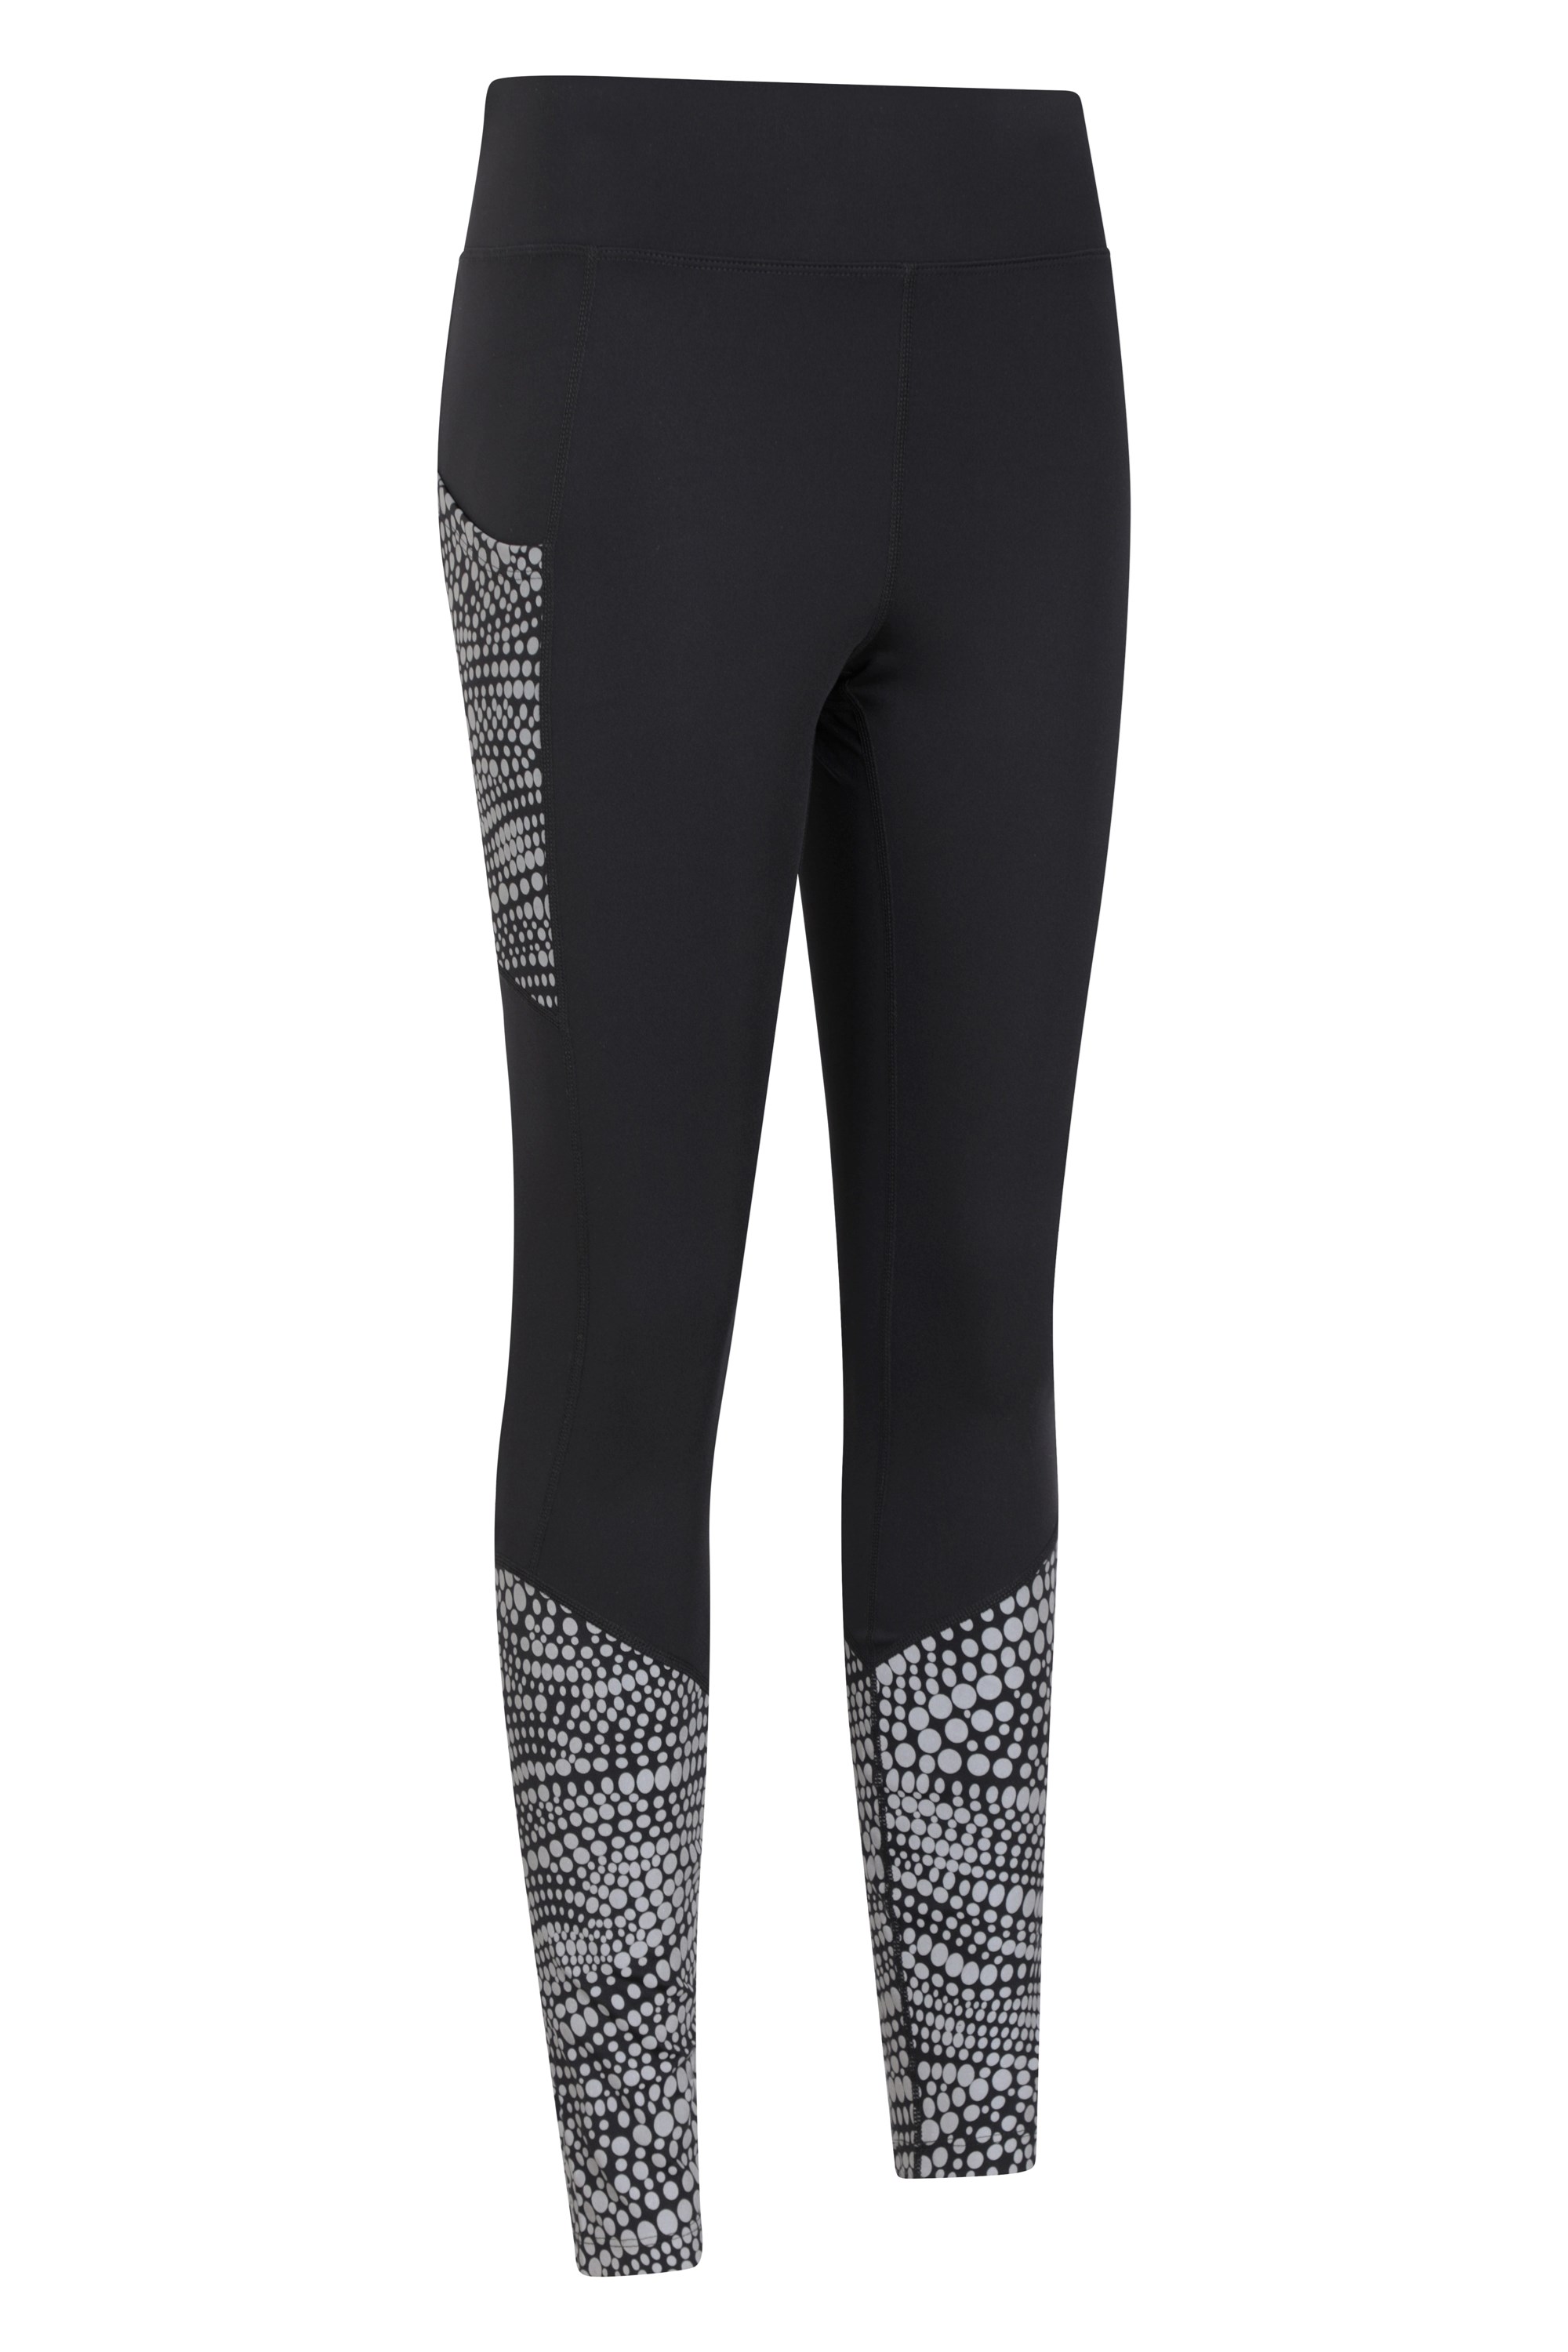 Stay comfortable and stylish with Nike Pro HyperWarm Leggings